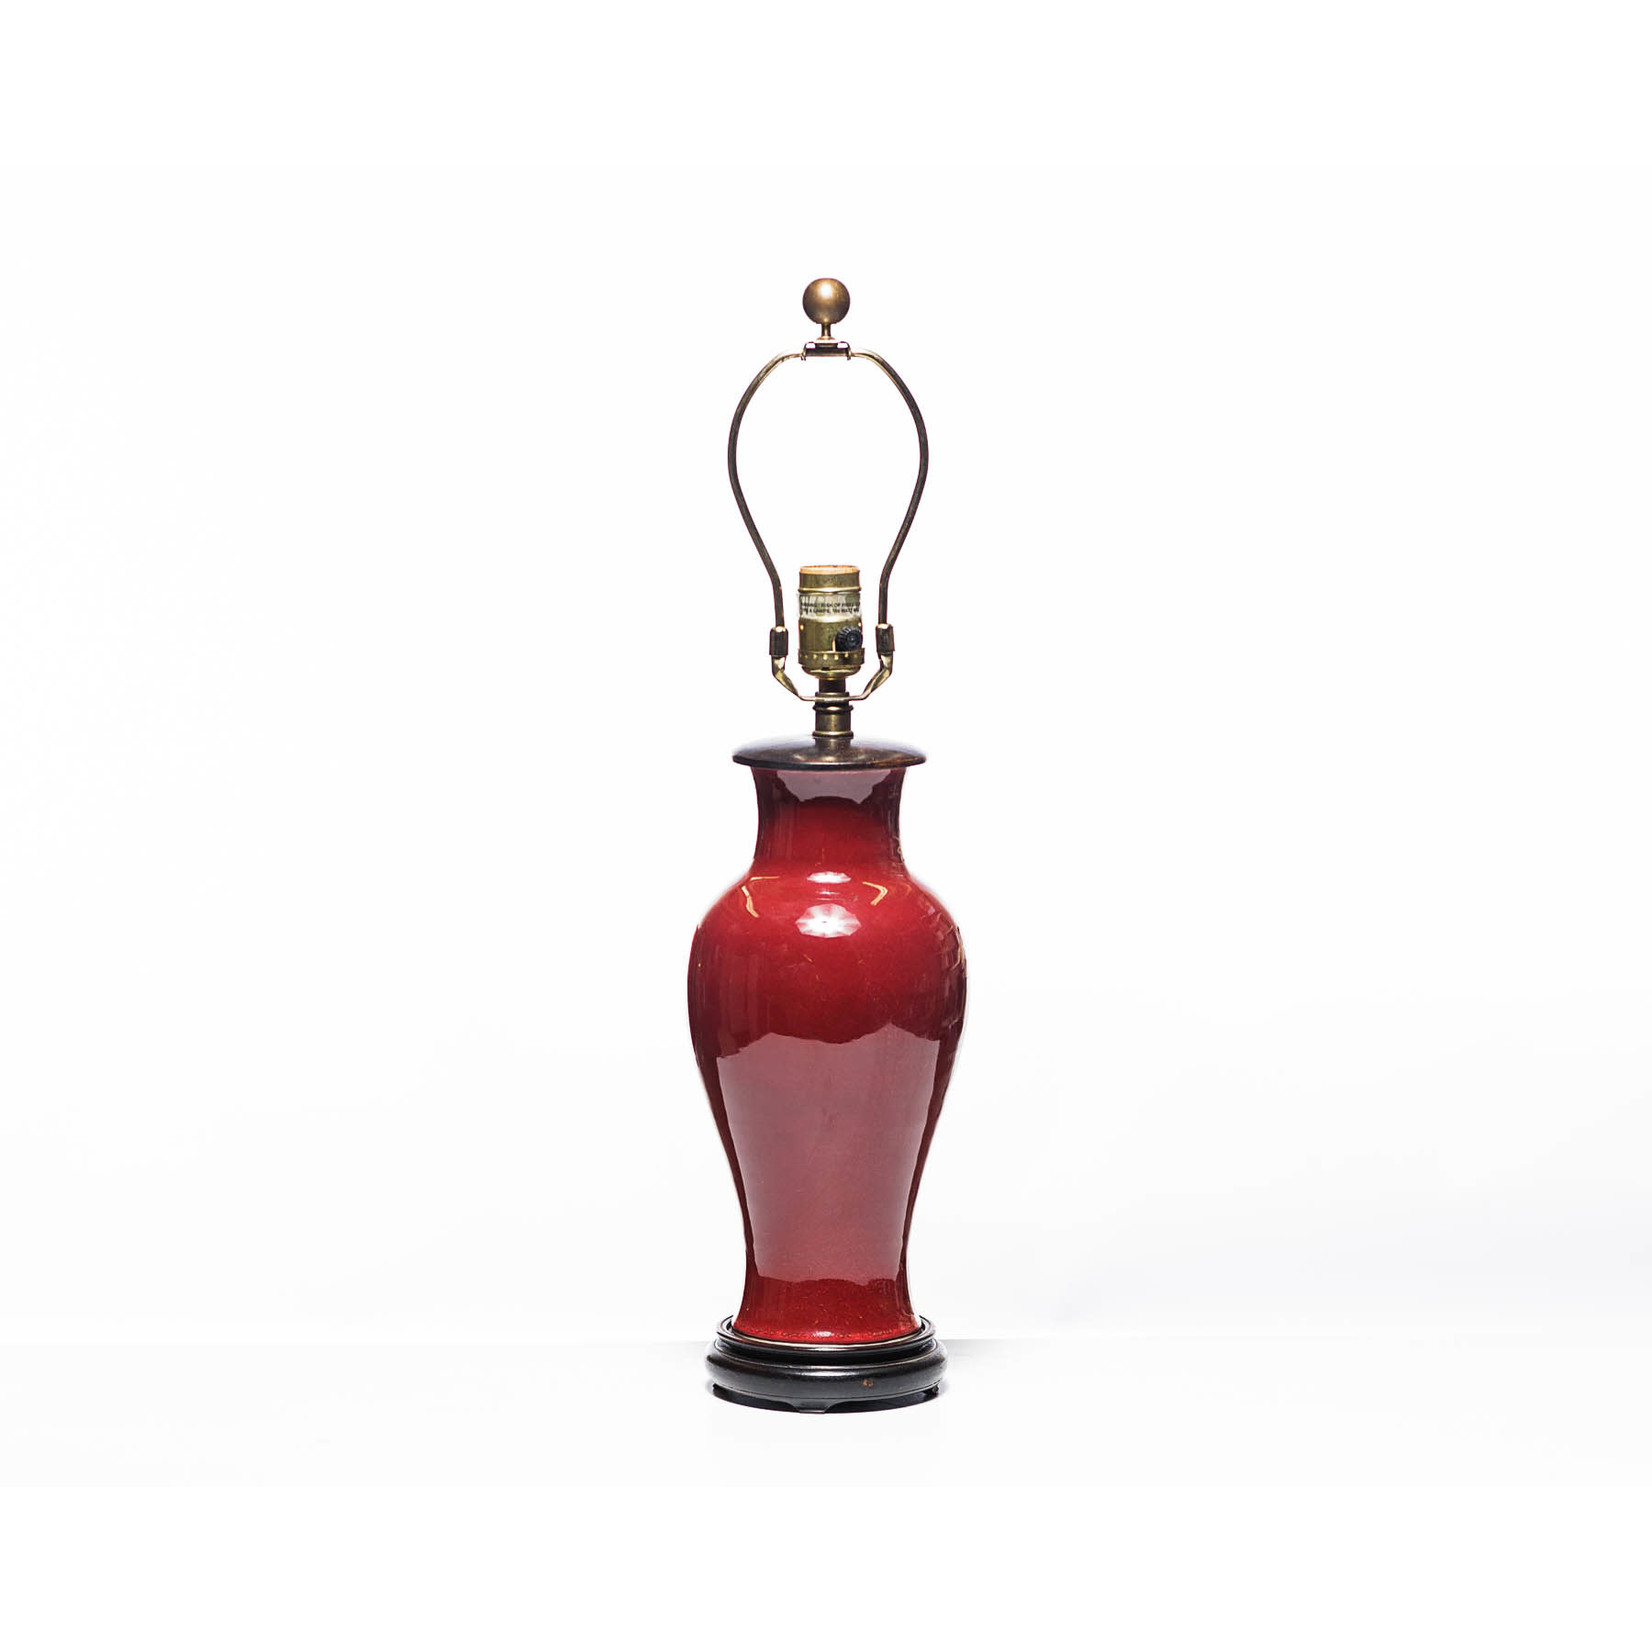 Lawrence & Scott Legacy Gabrielle Porcelain Lamp in  Pinot Red with Rosewood Base